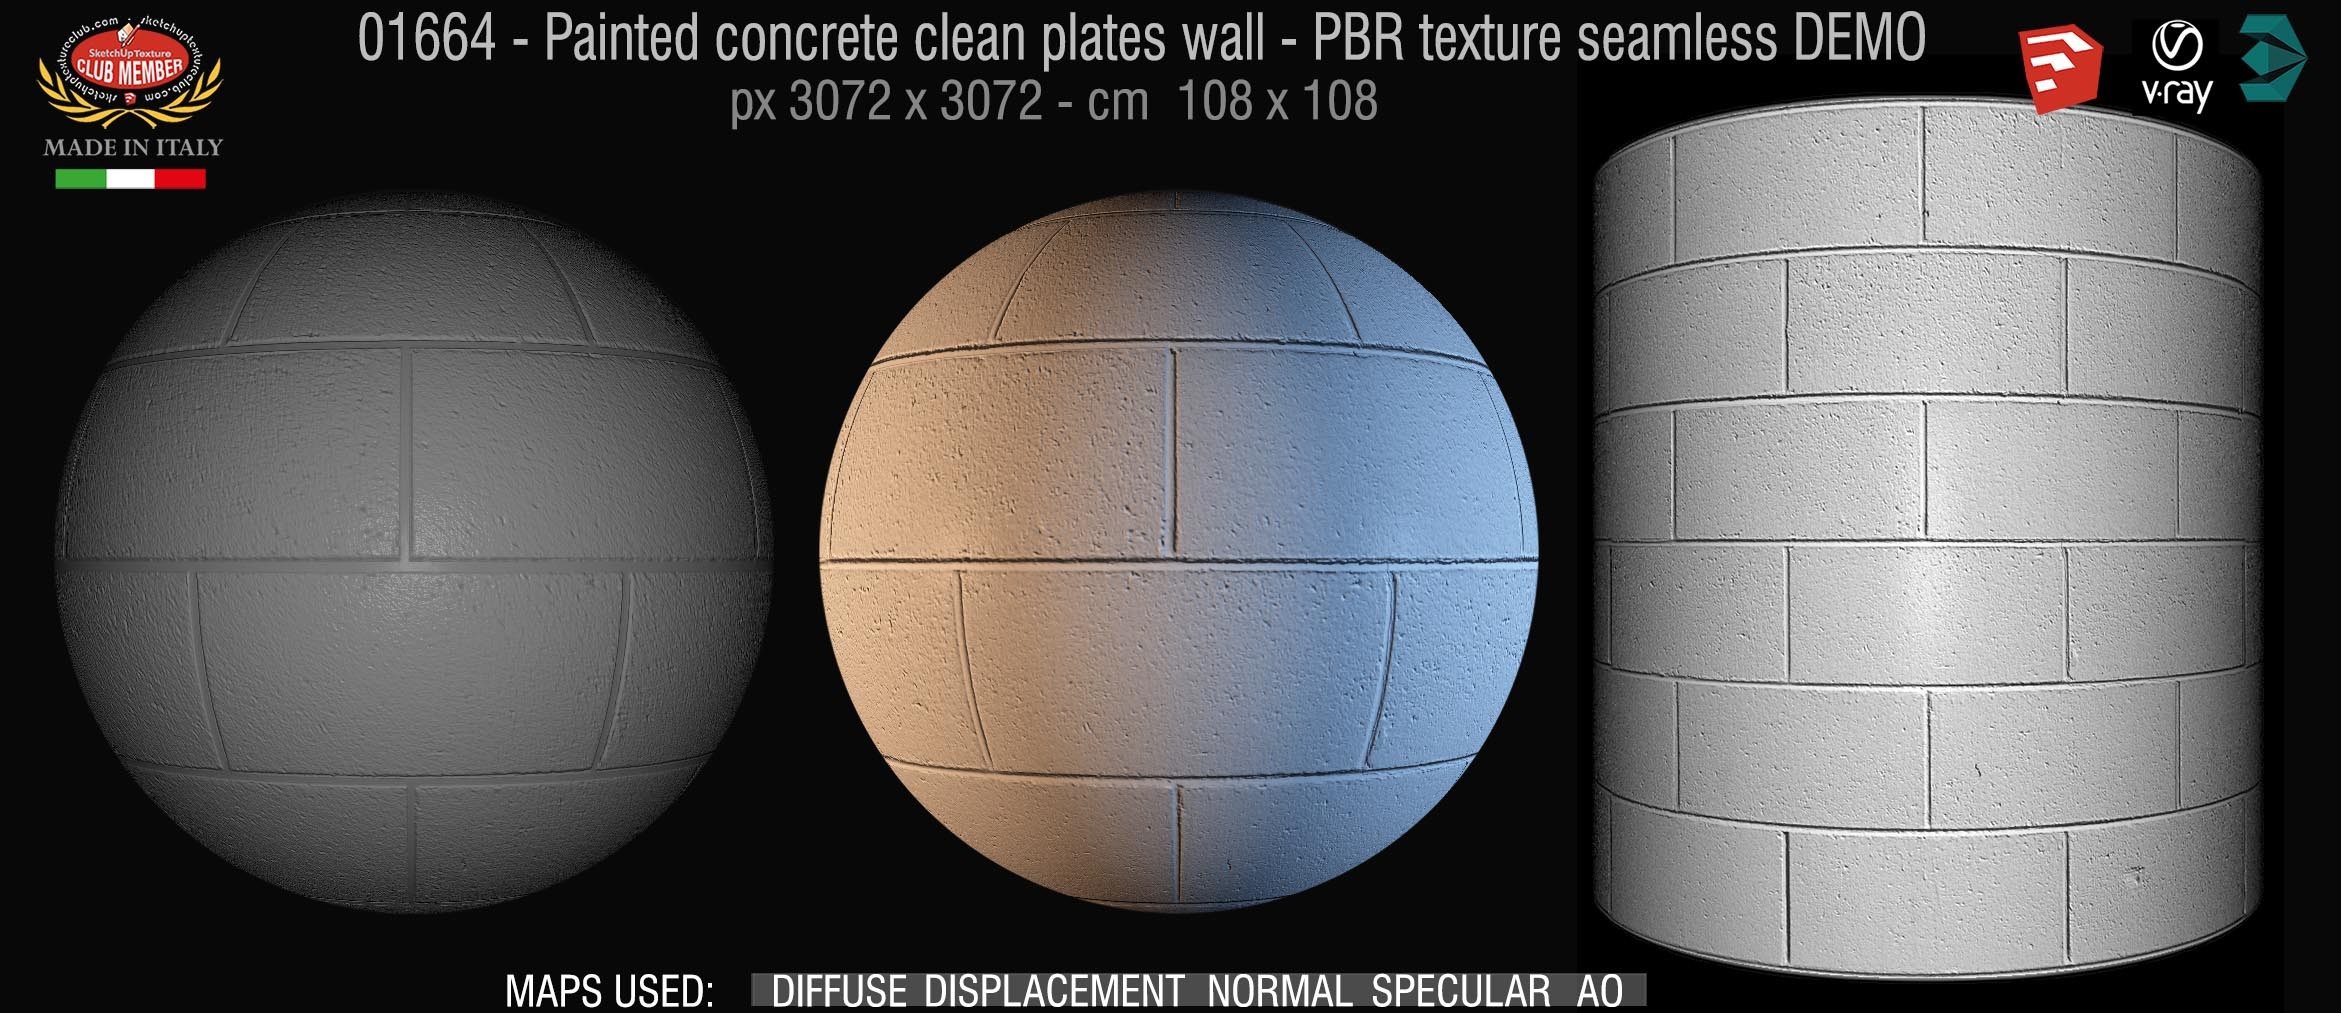 01664 Painted concrete clean plates wall PBR texture seamless DEMO